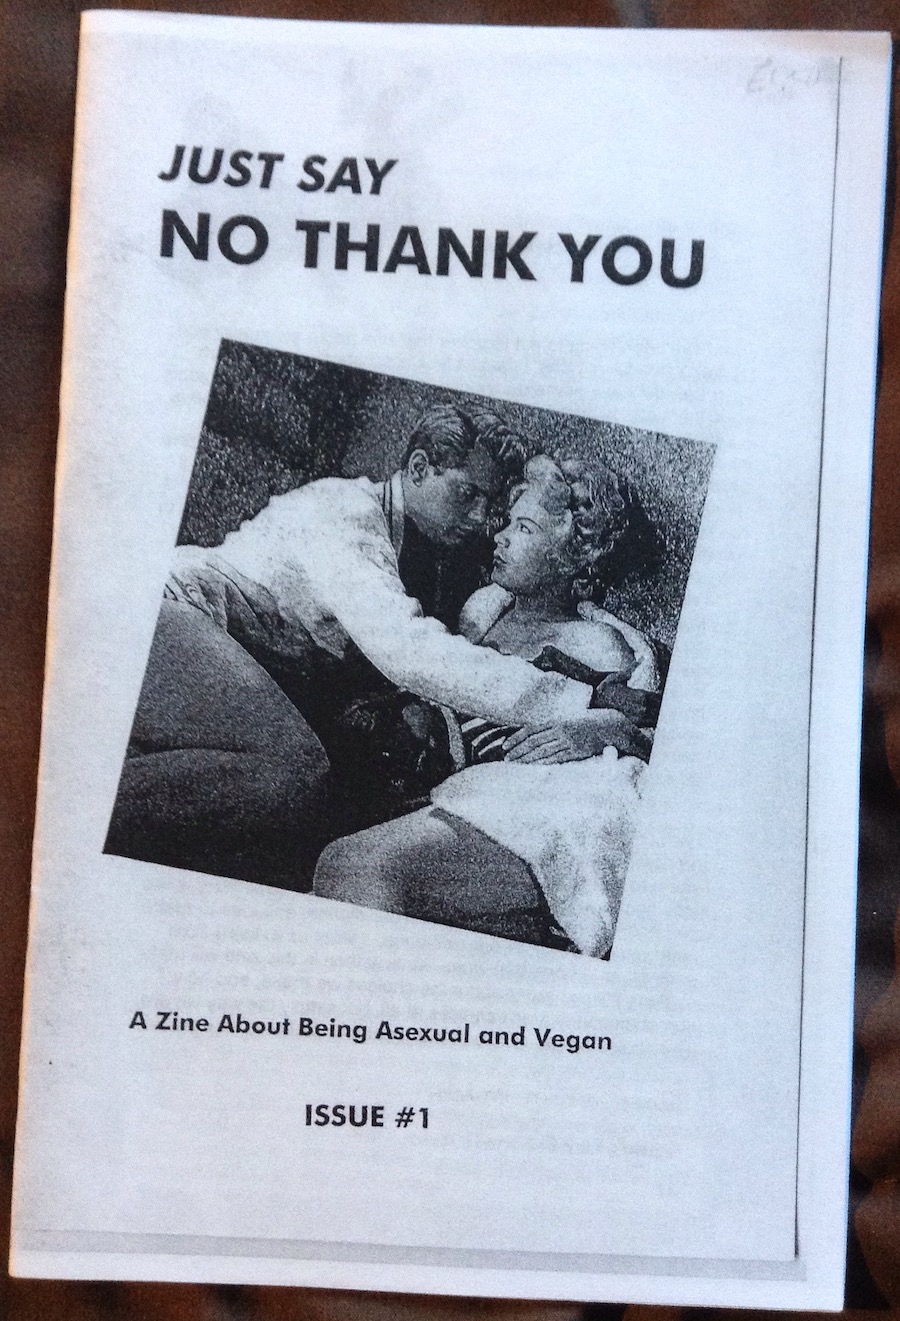 photo of a zine cover: 1950s looking heterosexual couple--man making a move on a woman pushing him away